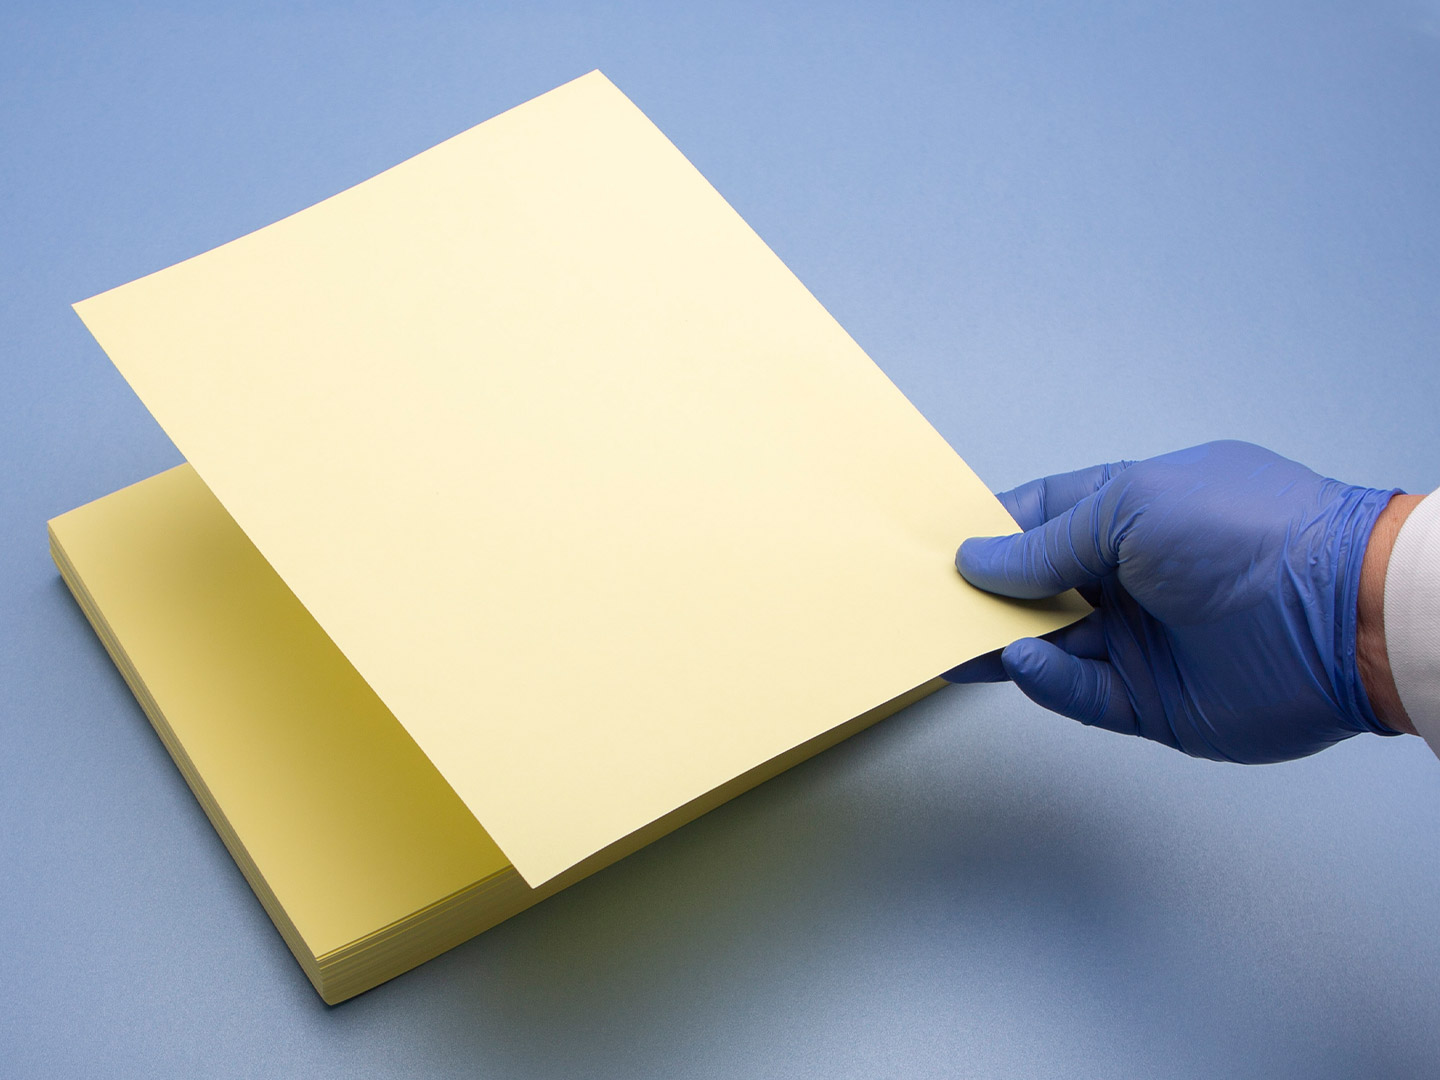 Autoclavable Cleanroom Paper